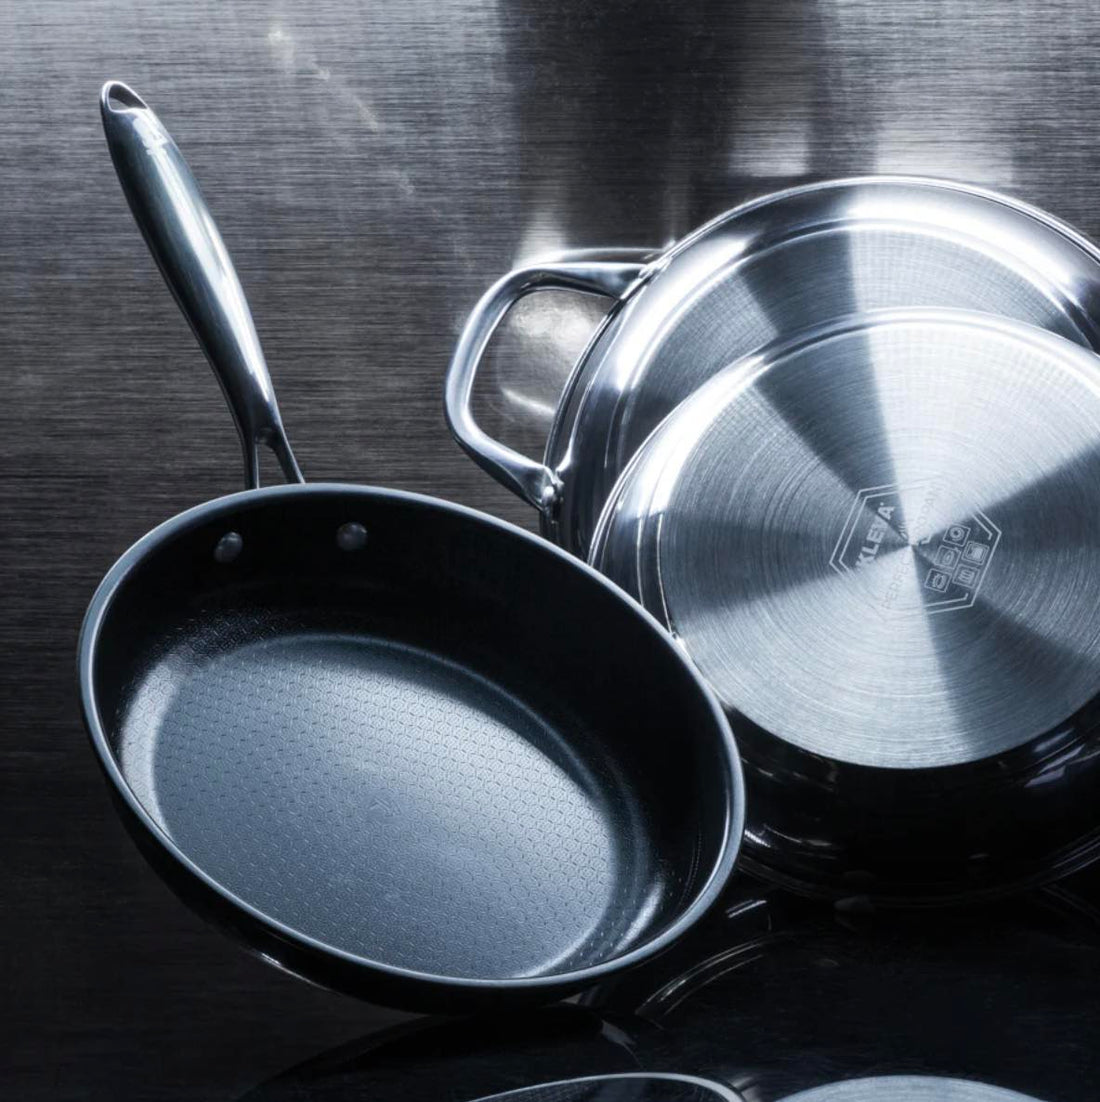 Which type of frying pan is best And Should I get a 24cm or 28cm frying pan?